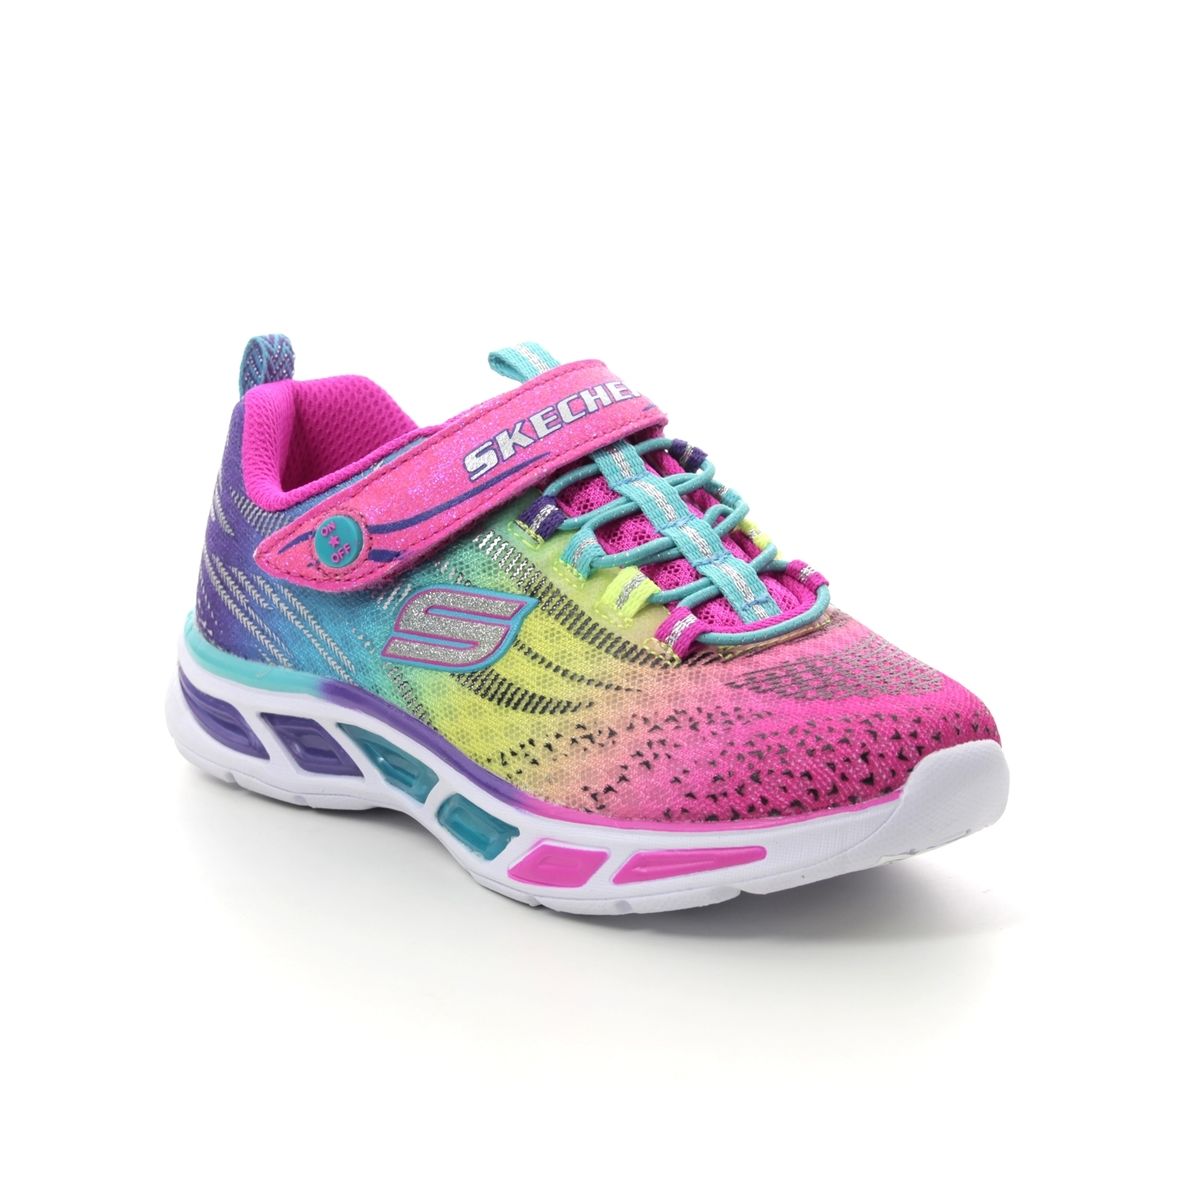 colorful skechers shoes